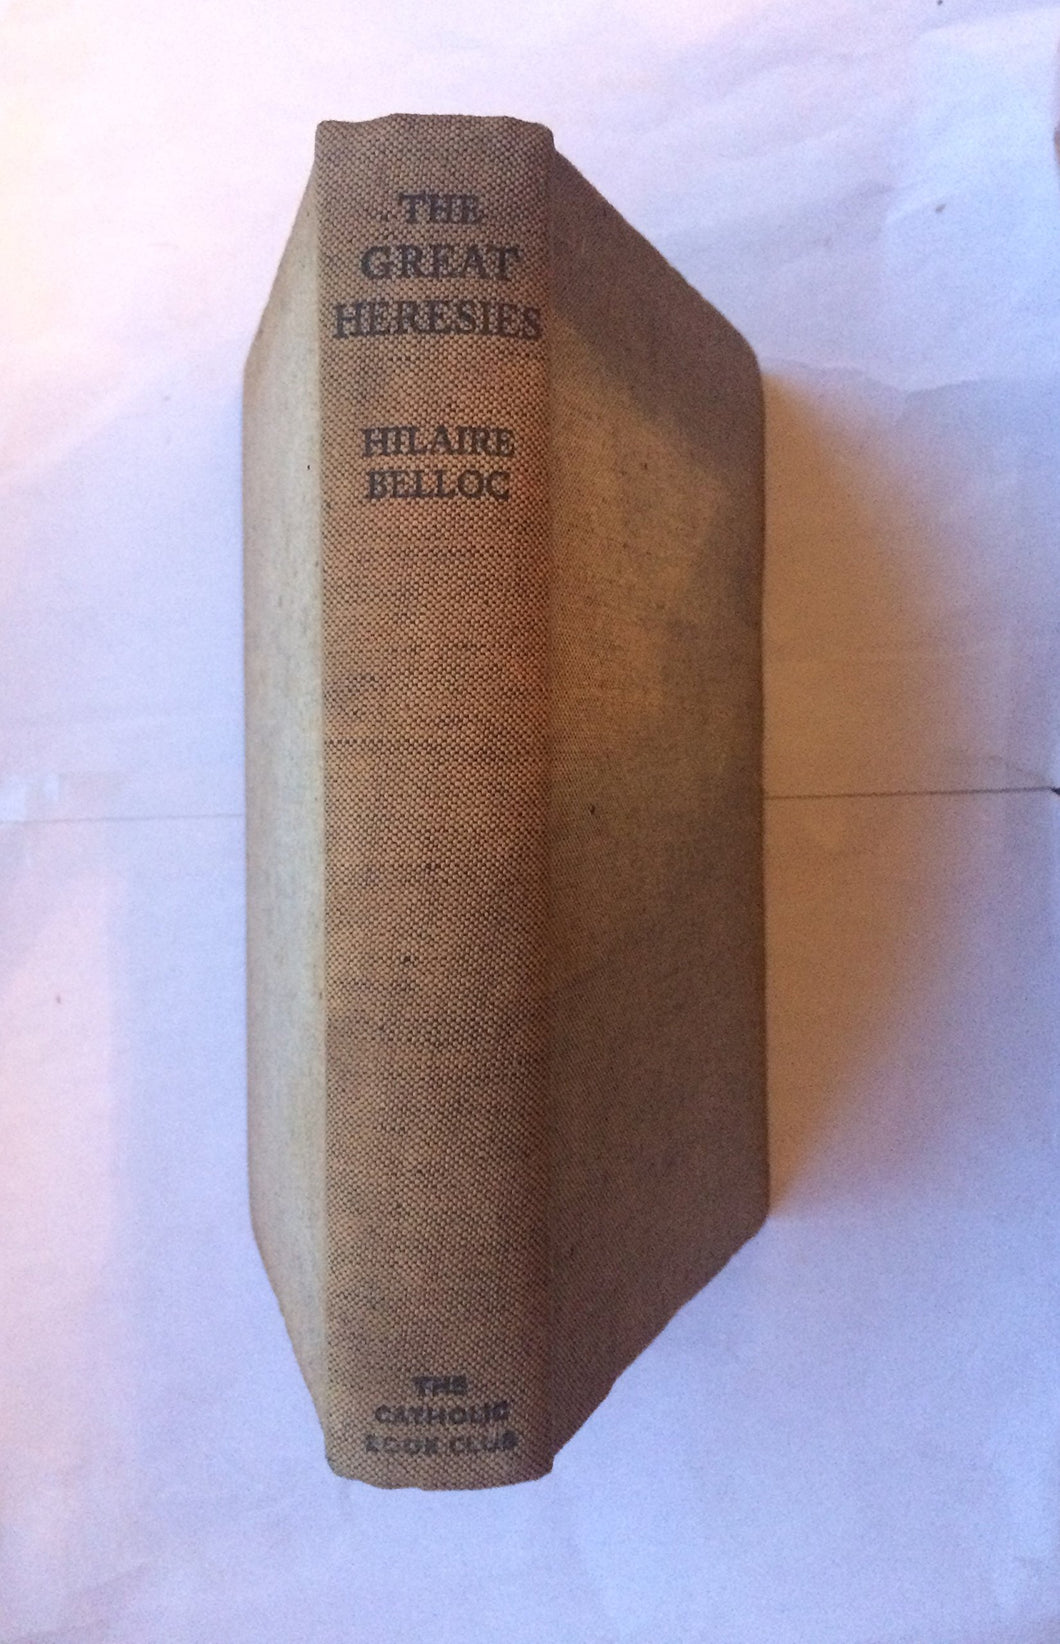 The Great Heresies [Hardcover] Belloc, Hilaire